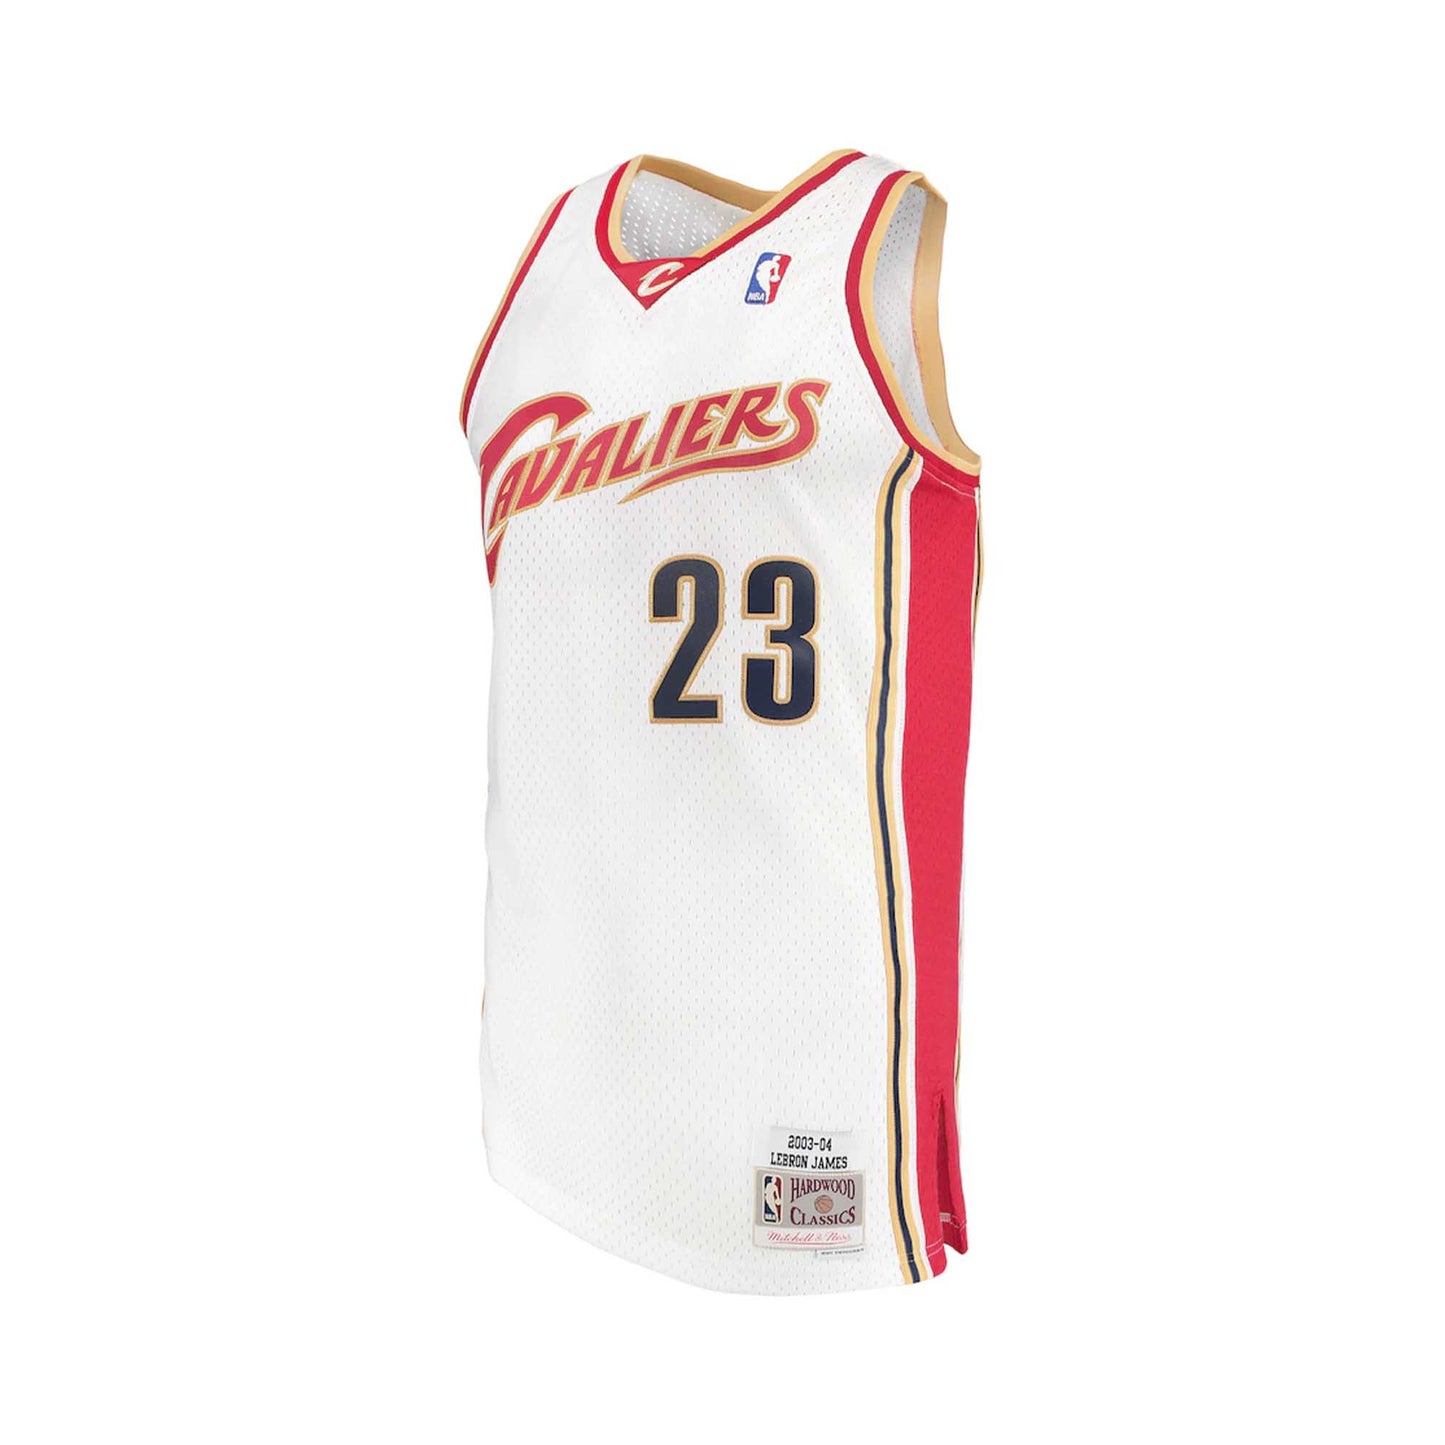  Mitchell & Ness Lebron James 2003-04 Authentic Jersey Cleveland  Cavaliers (S (36)) : Sports & Outdoors